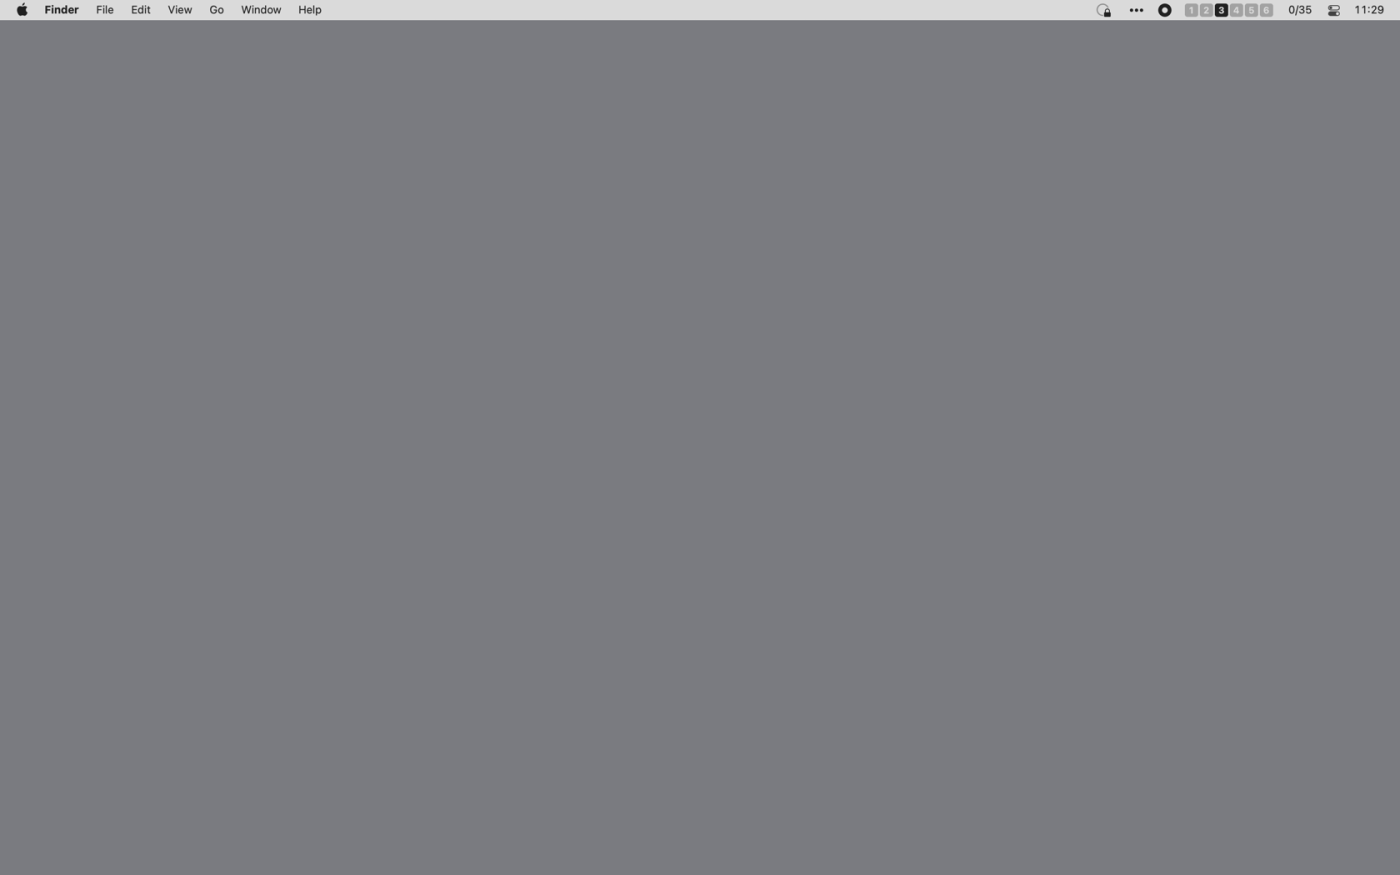 Aleks's desktop: completely gray with nothing on it